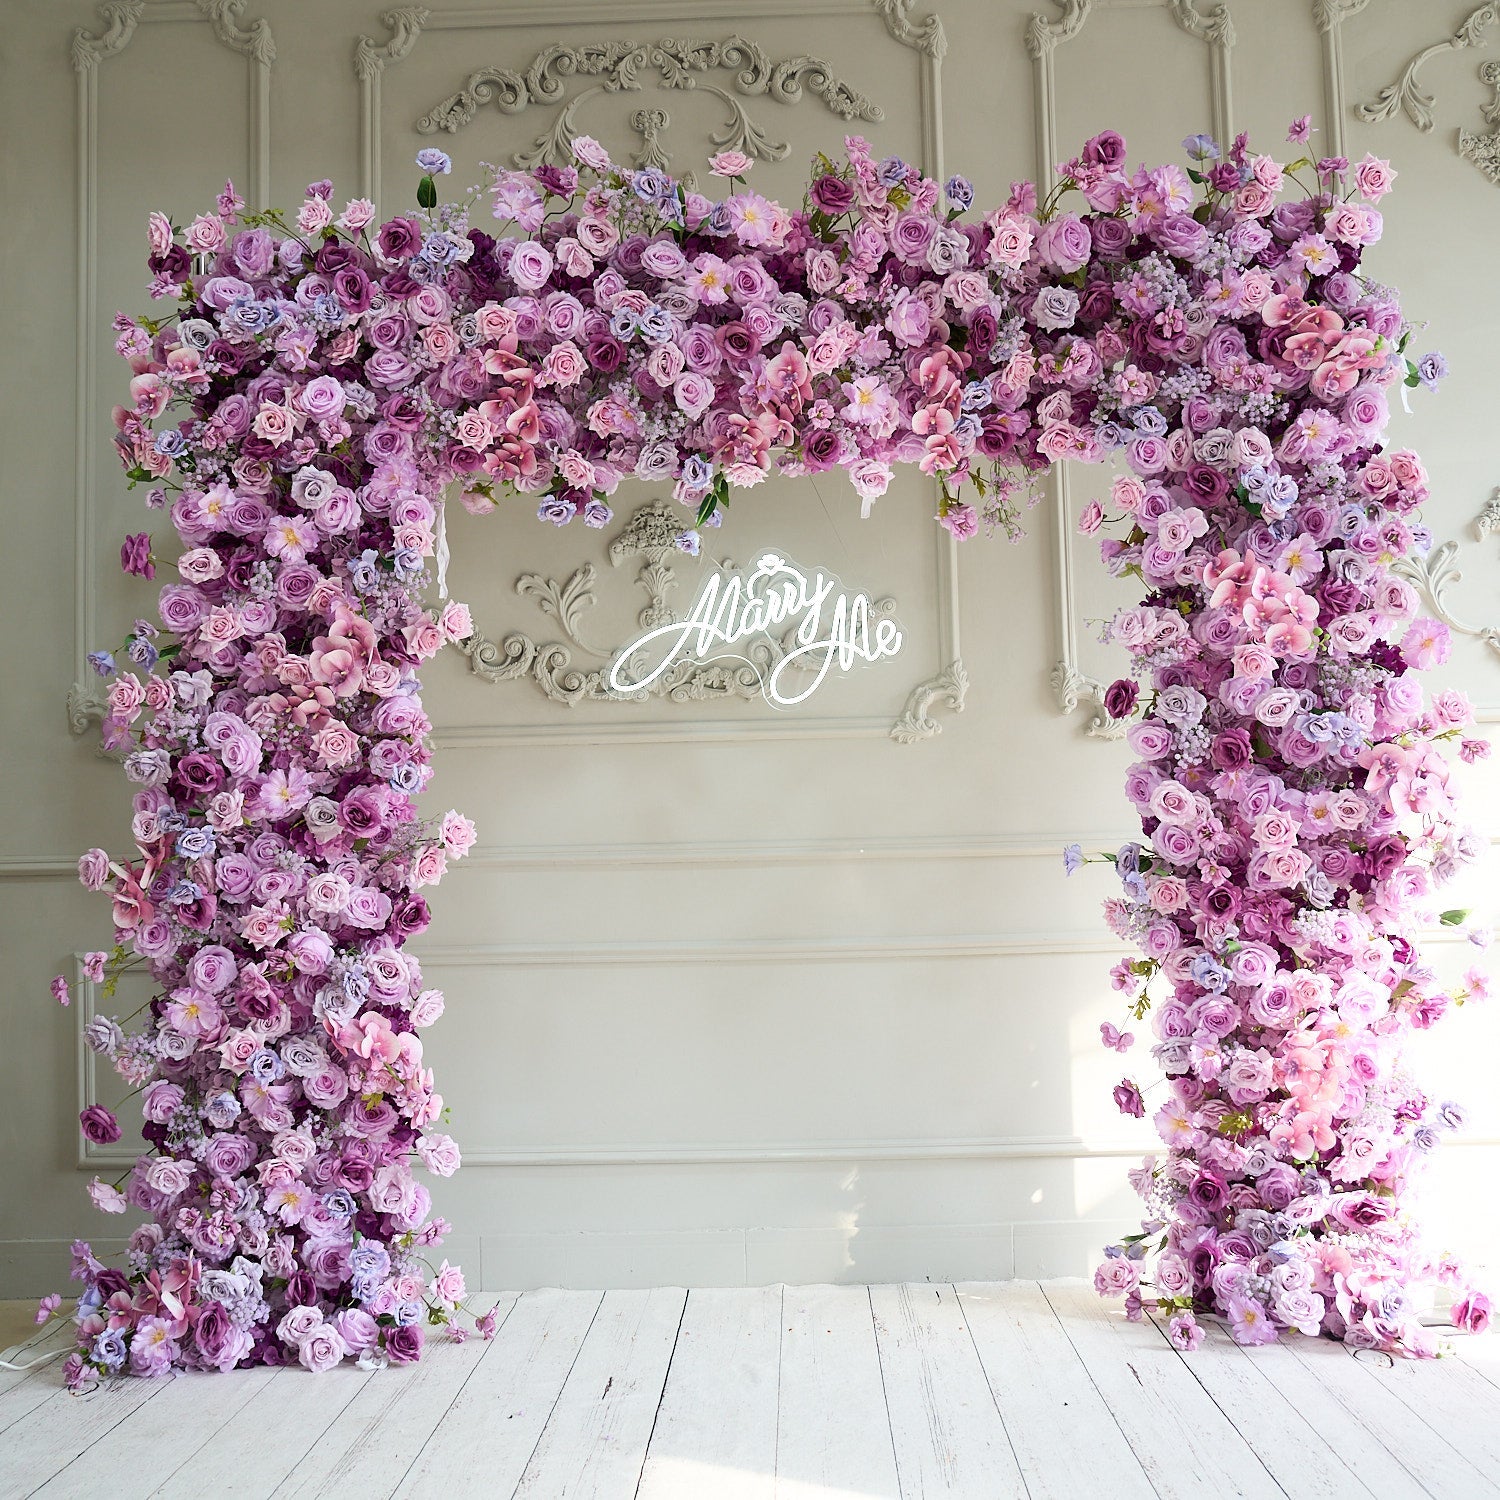 The purple roses florals flower wall looks elegant and romantic.